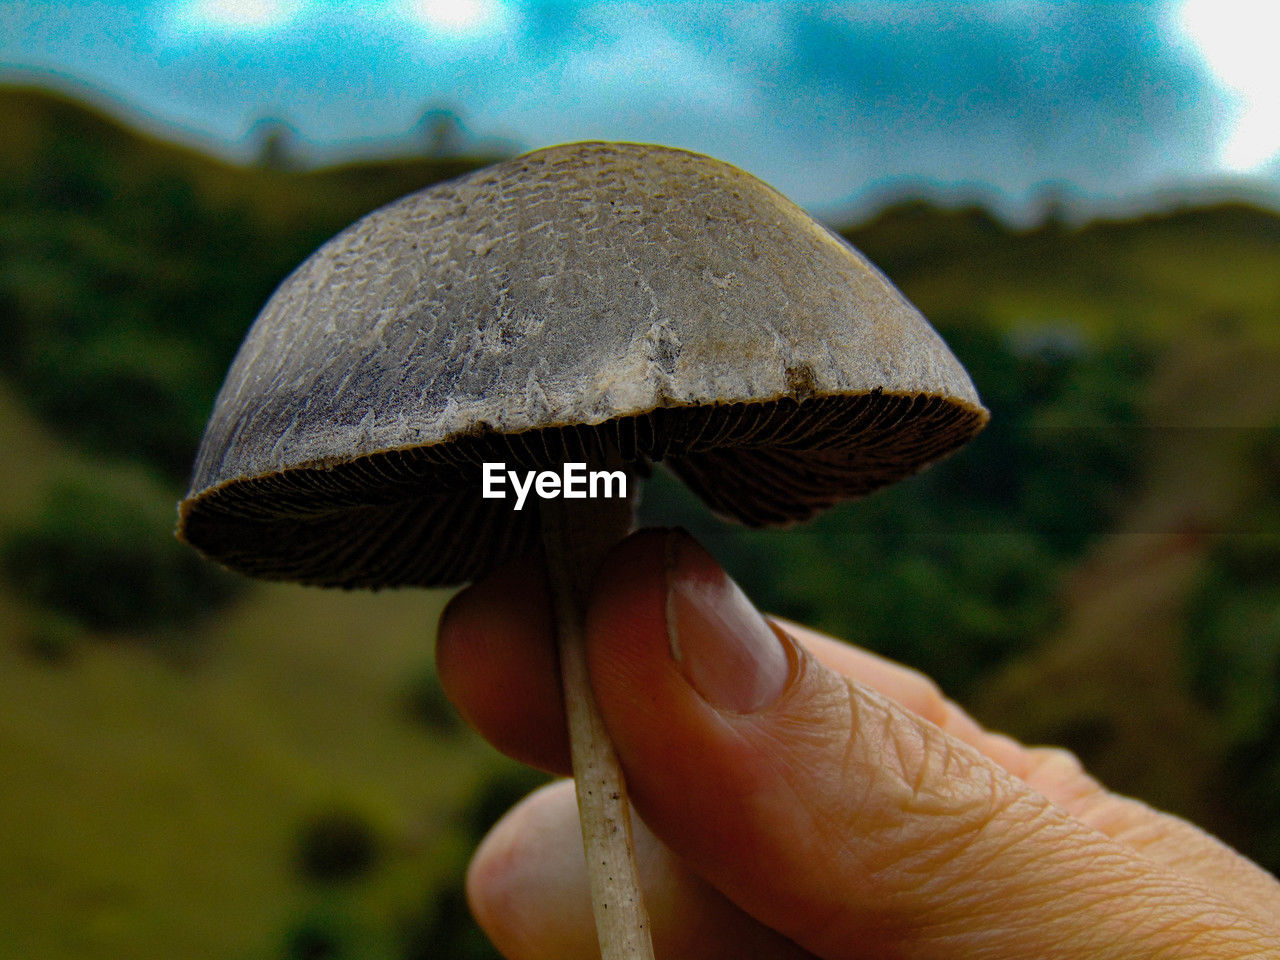 cropped hand of person holding mushroom